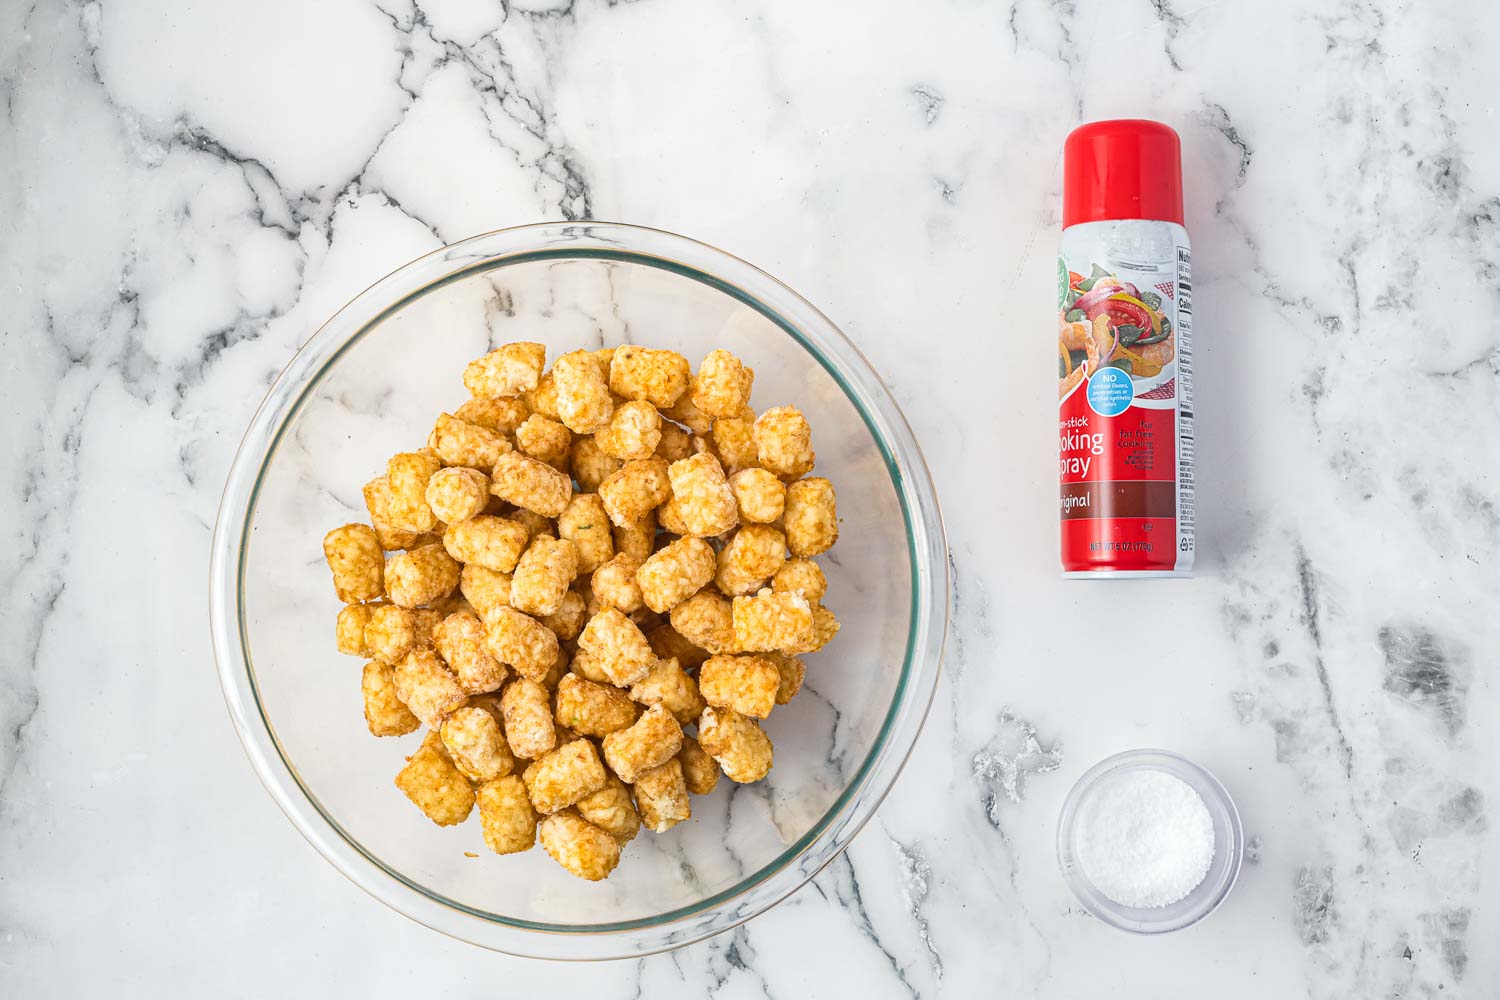 Ingredients needed to air fry tater tots including frozen tater tots, cooking spray, and salt.